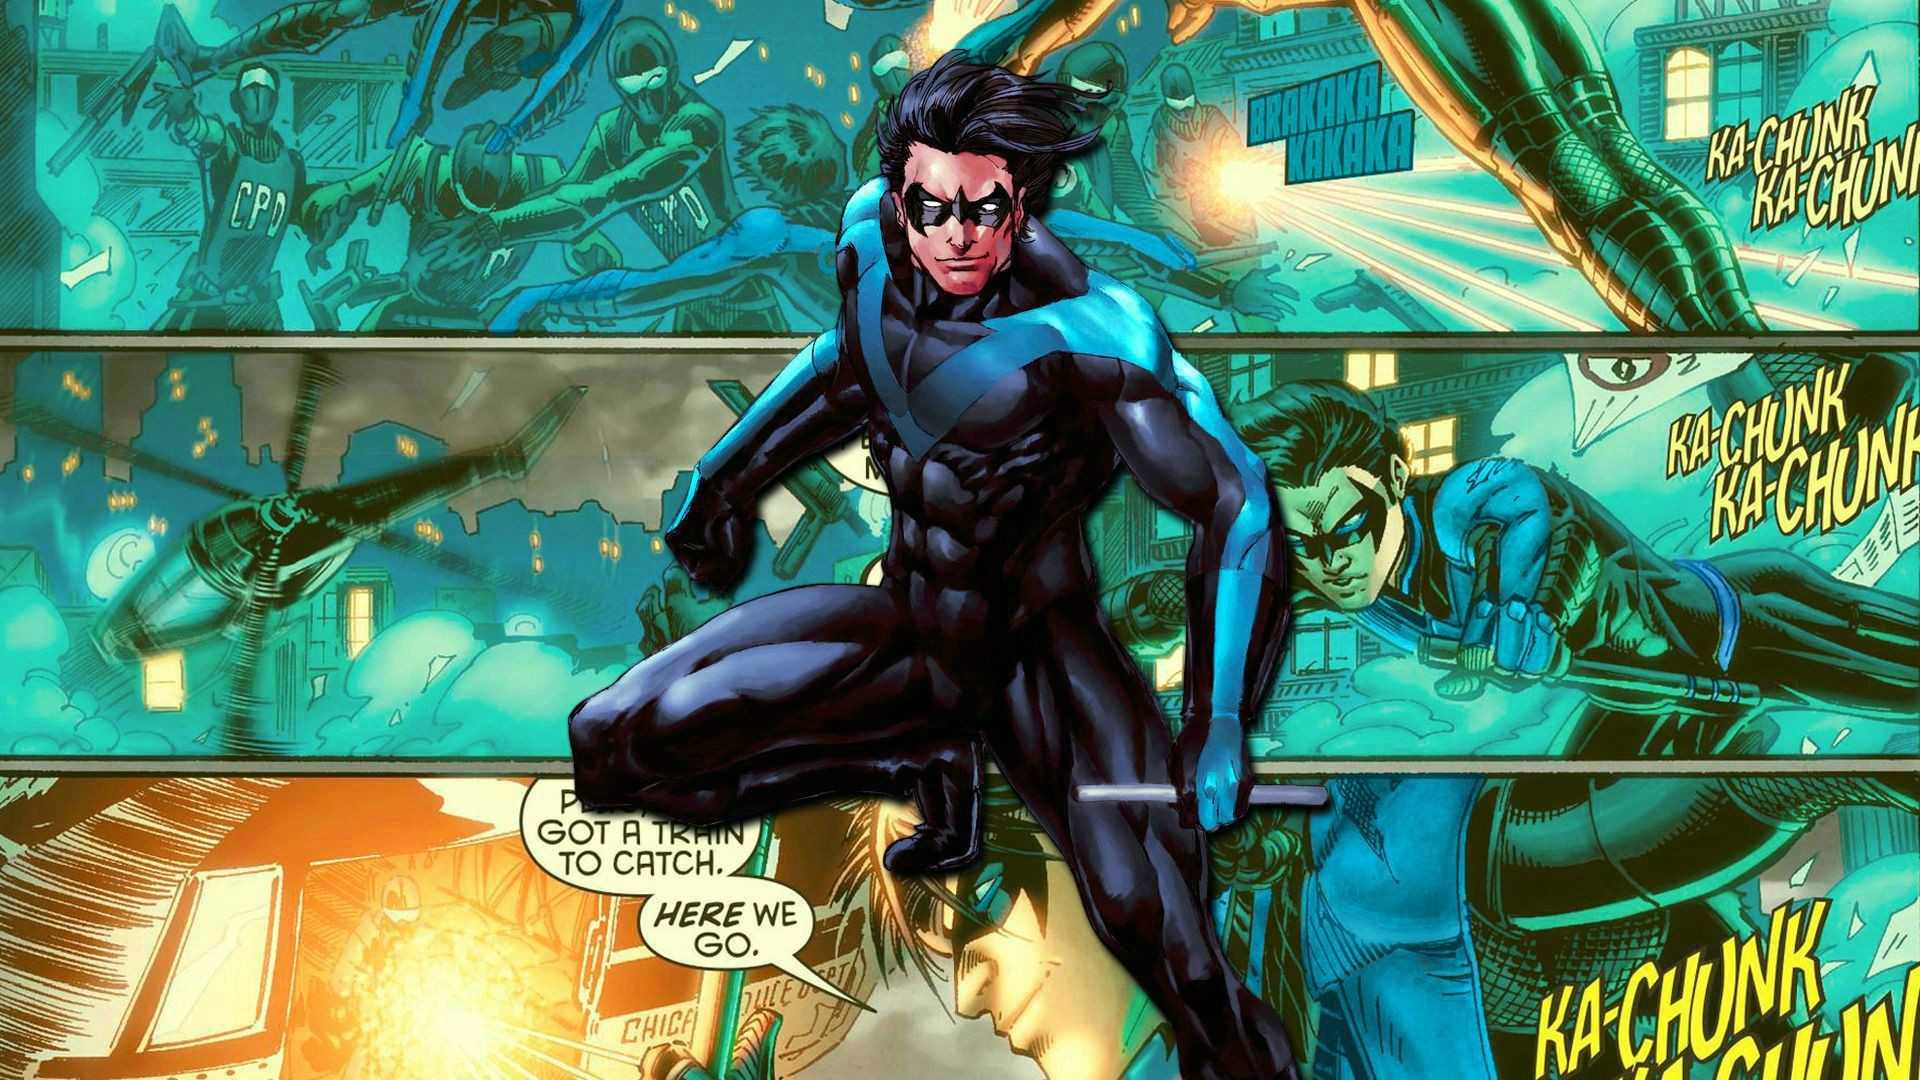 1920x1080 New Nightwing Wallpaper | HD Wallpapers | Pinterest | Wallpaper, Hd  wallpaper and deviantART